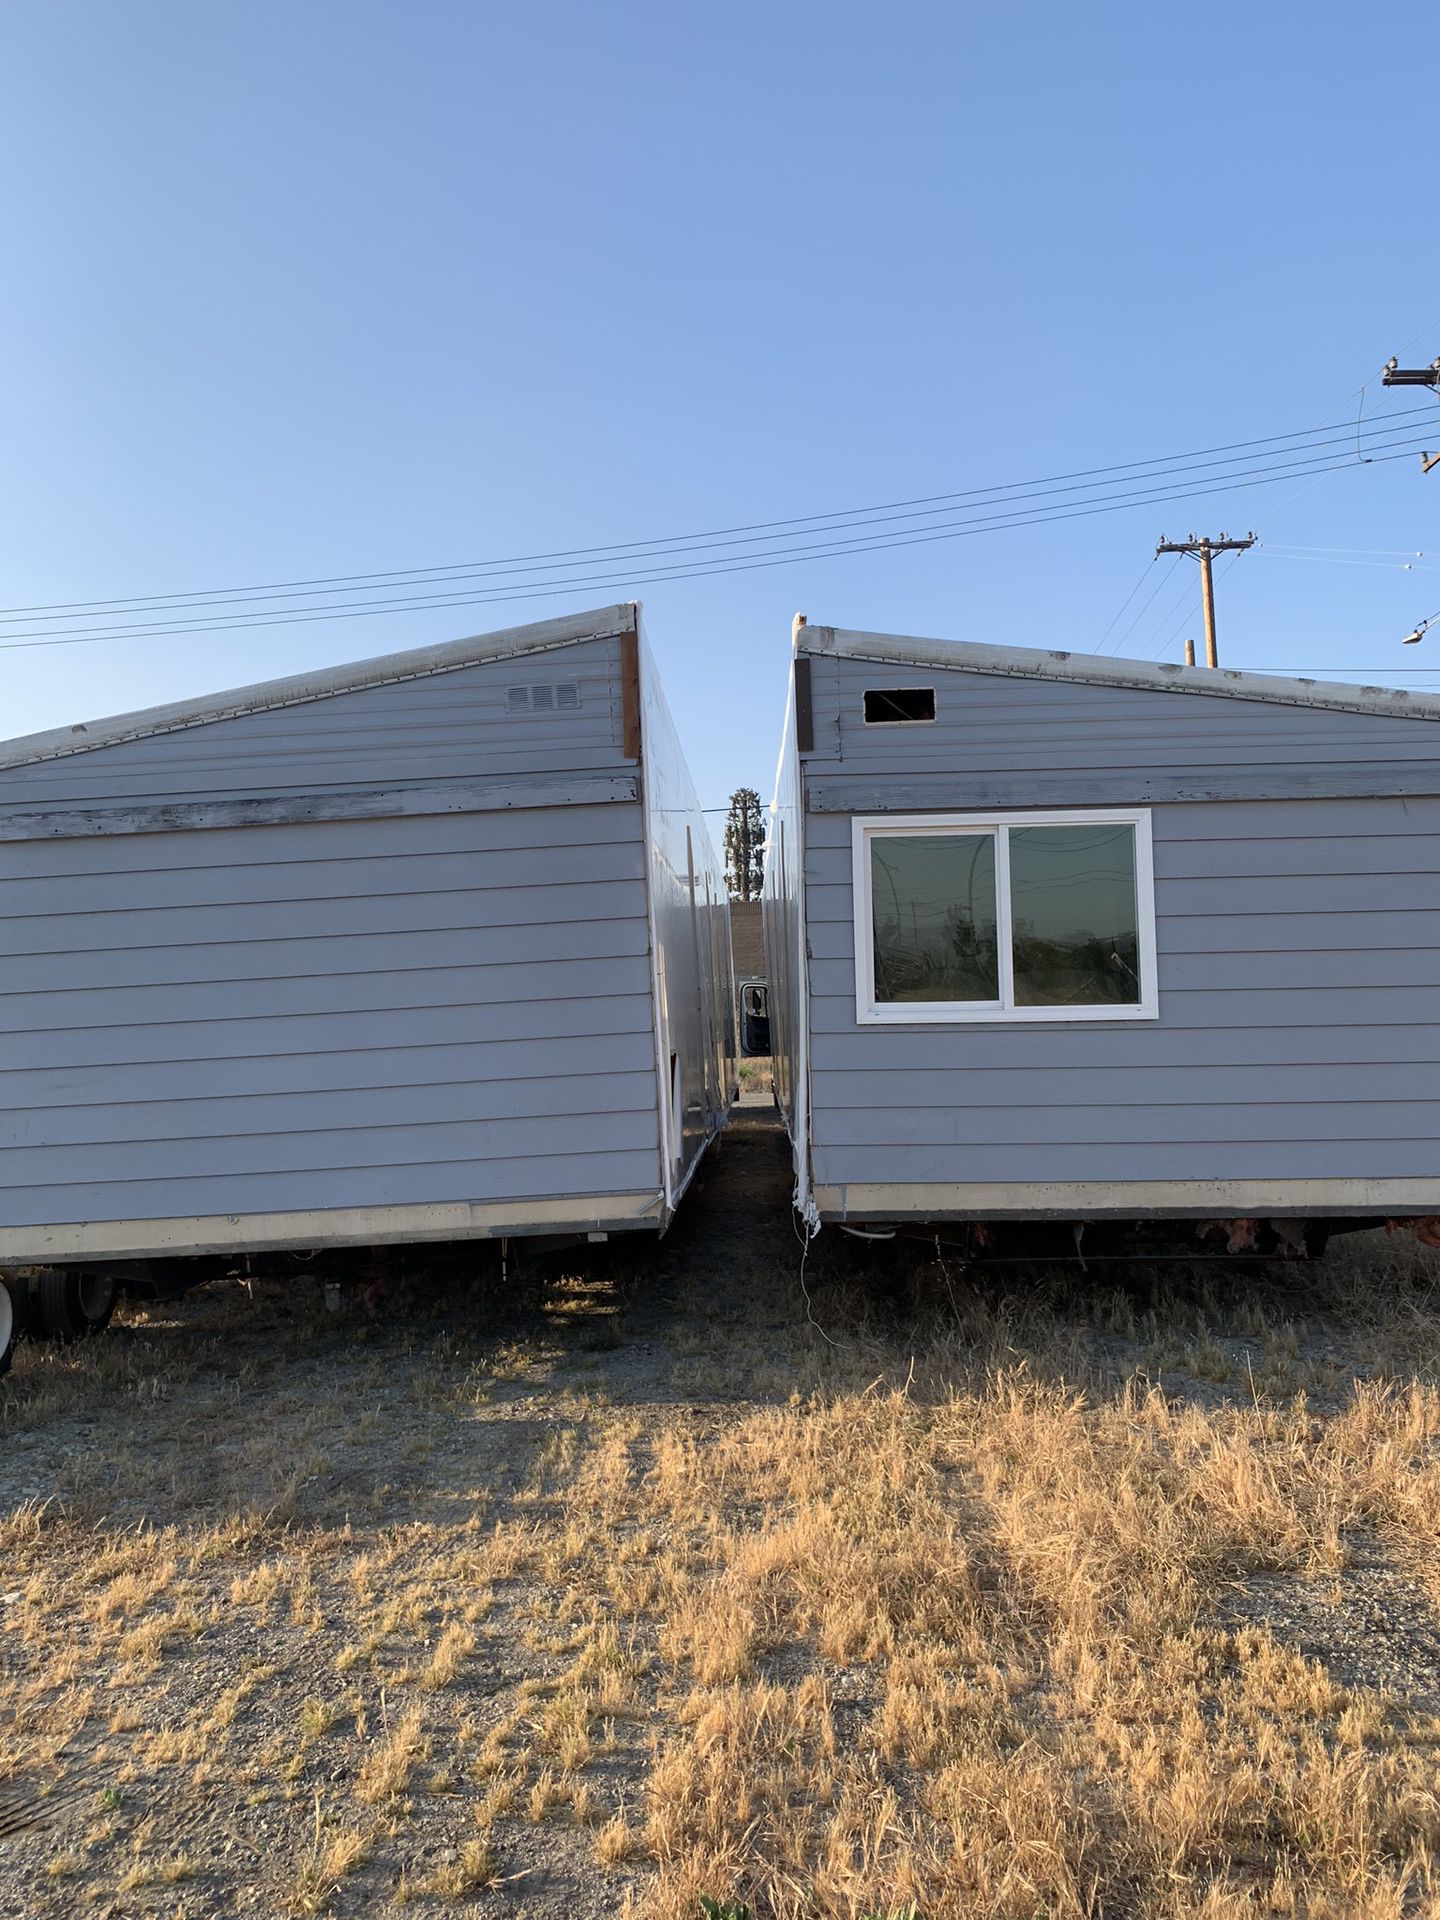 Mobile home for sale 1976.24x60 2 bedroom & 2 bath large living room . Ready to ship. Price included delivery within 30 miles and rough set up